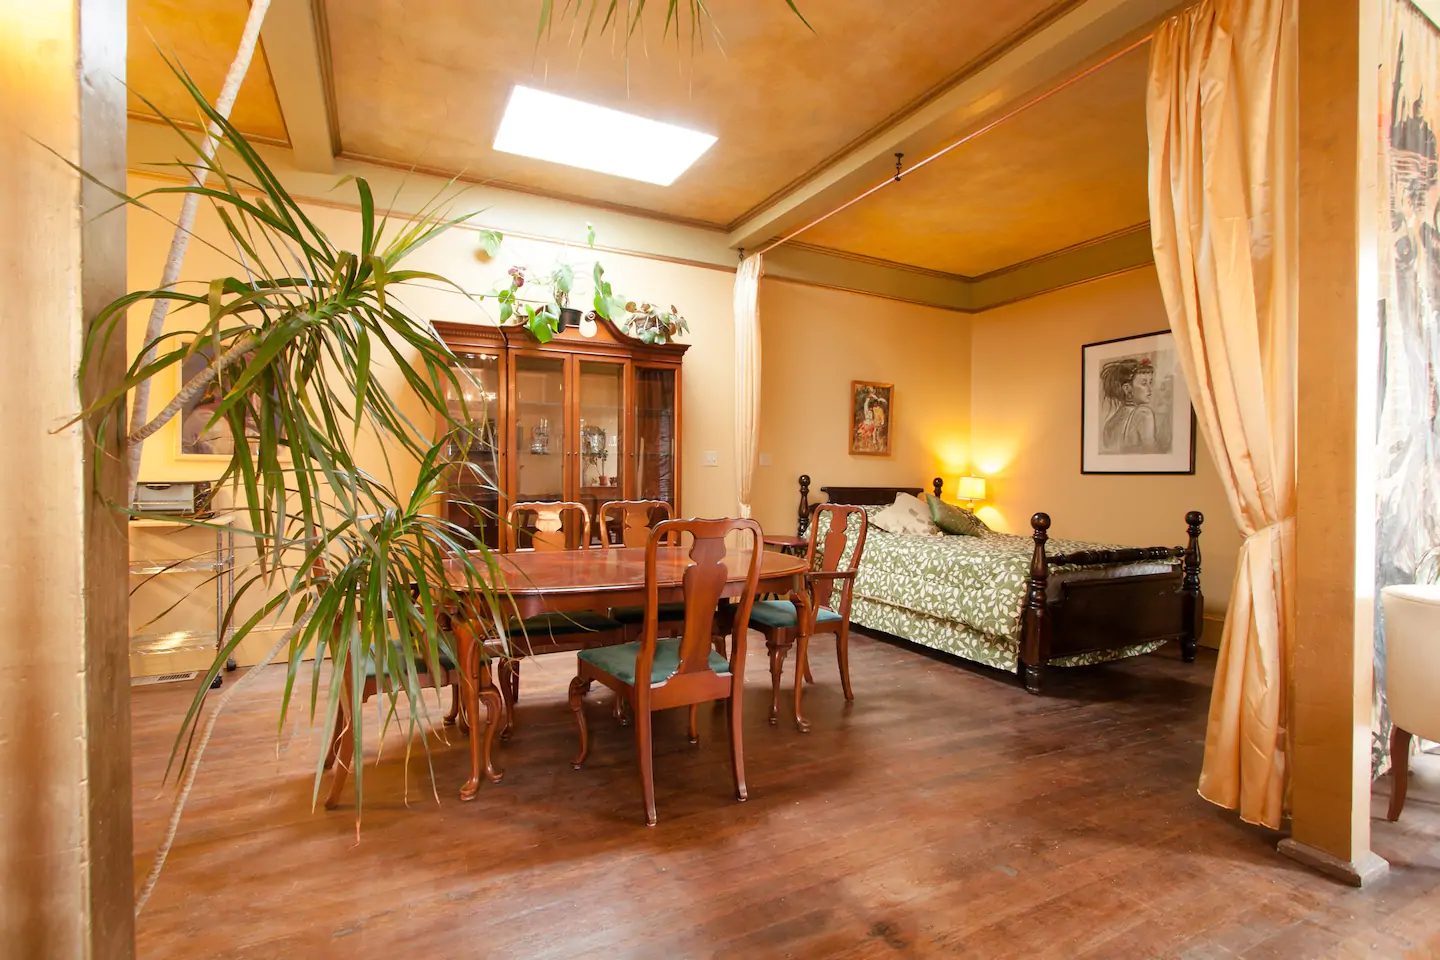 Warm wooden dining room table with chairs all around it. In the far back corner is a bed with green bedding.